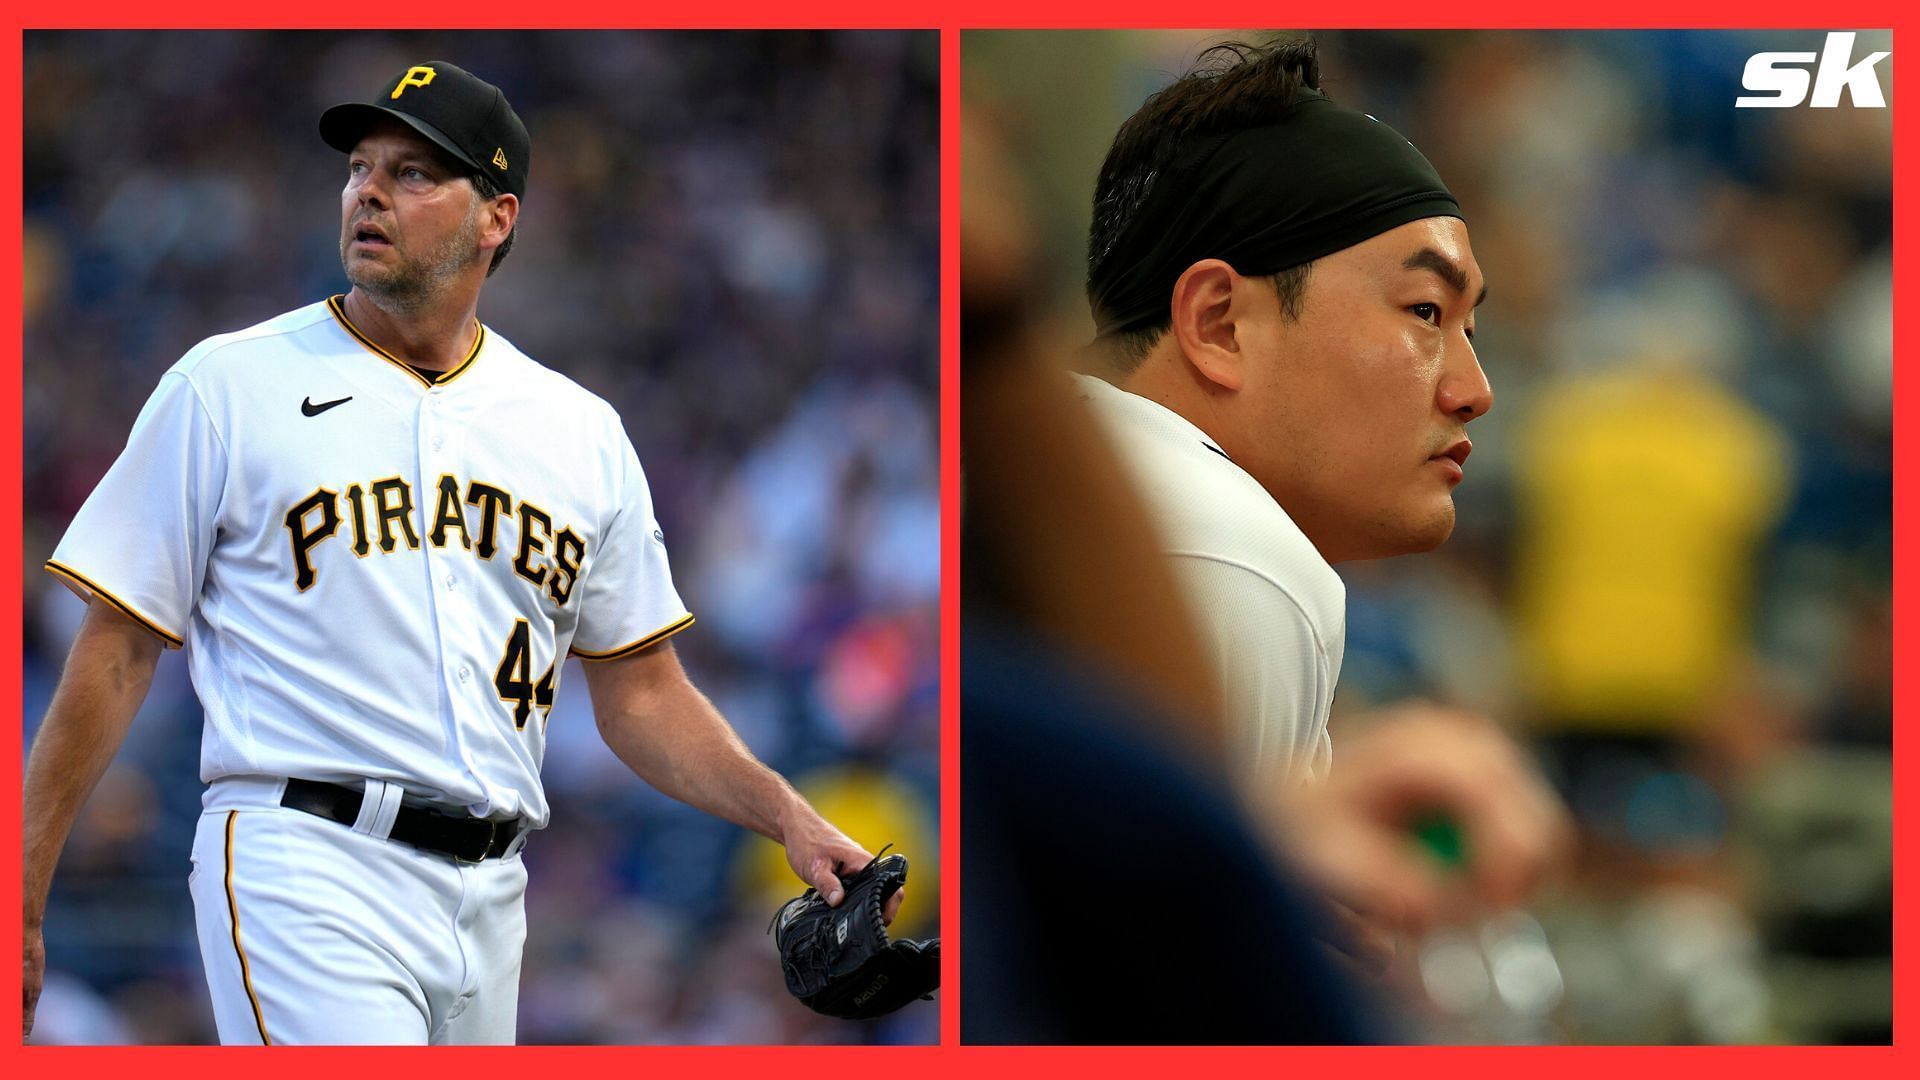 Padres trade for Pirates' Rich Hill, Ji-Man Choi ahead of deadline